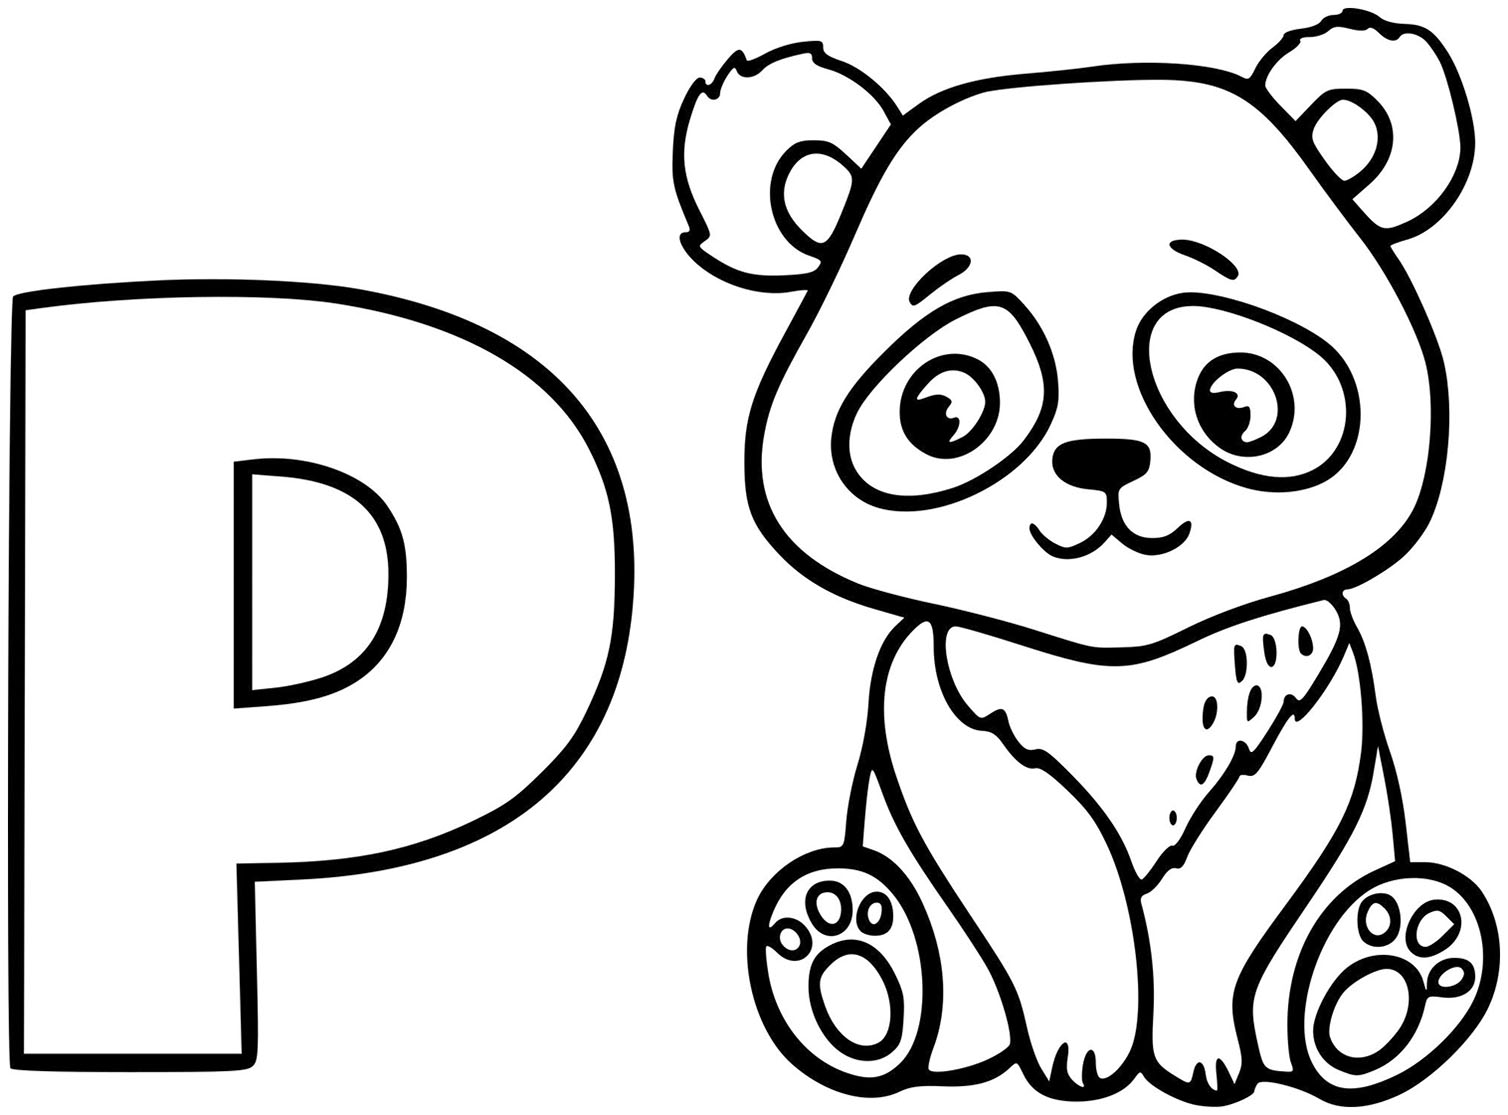 Panda coloring pages for kids - Pandas Kids Coloring Pages